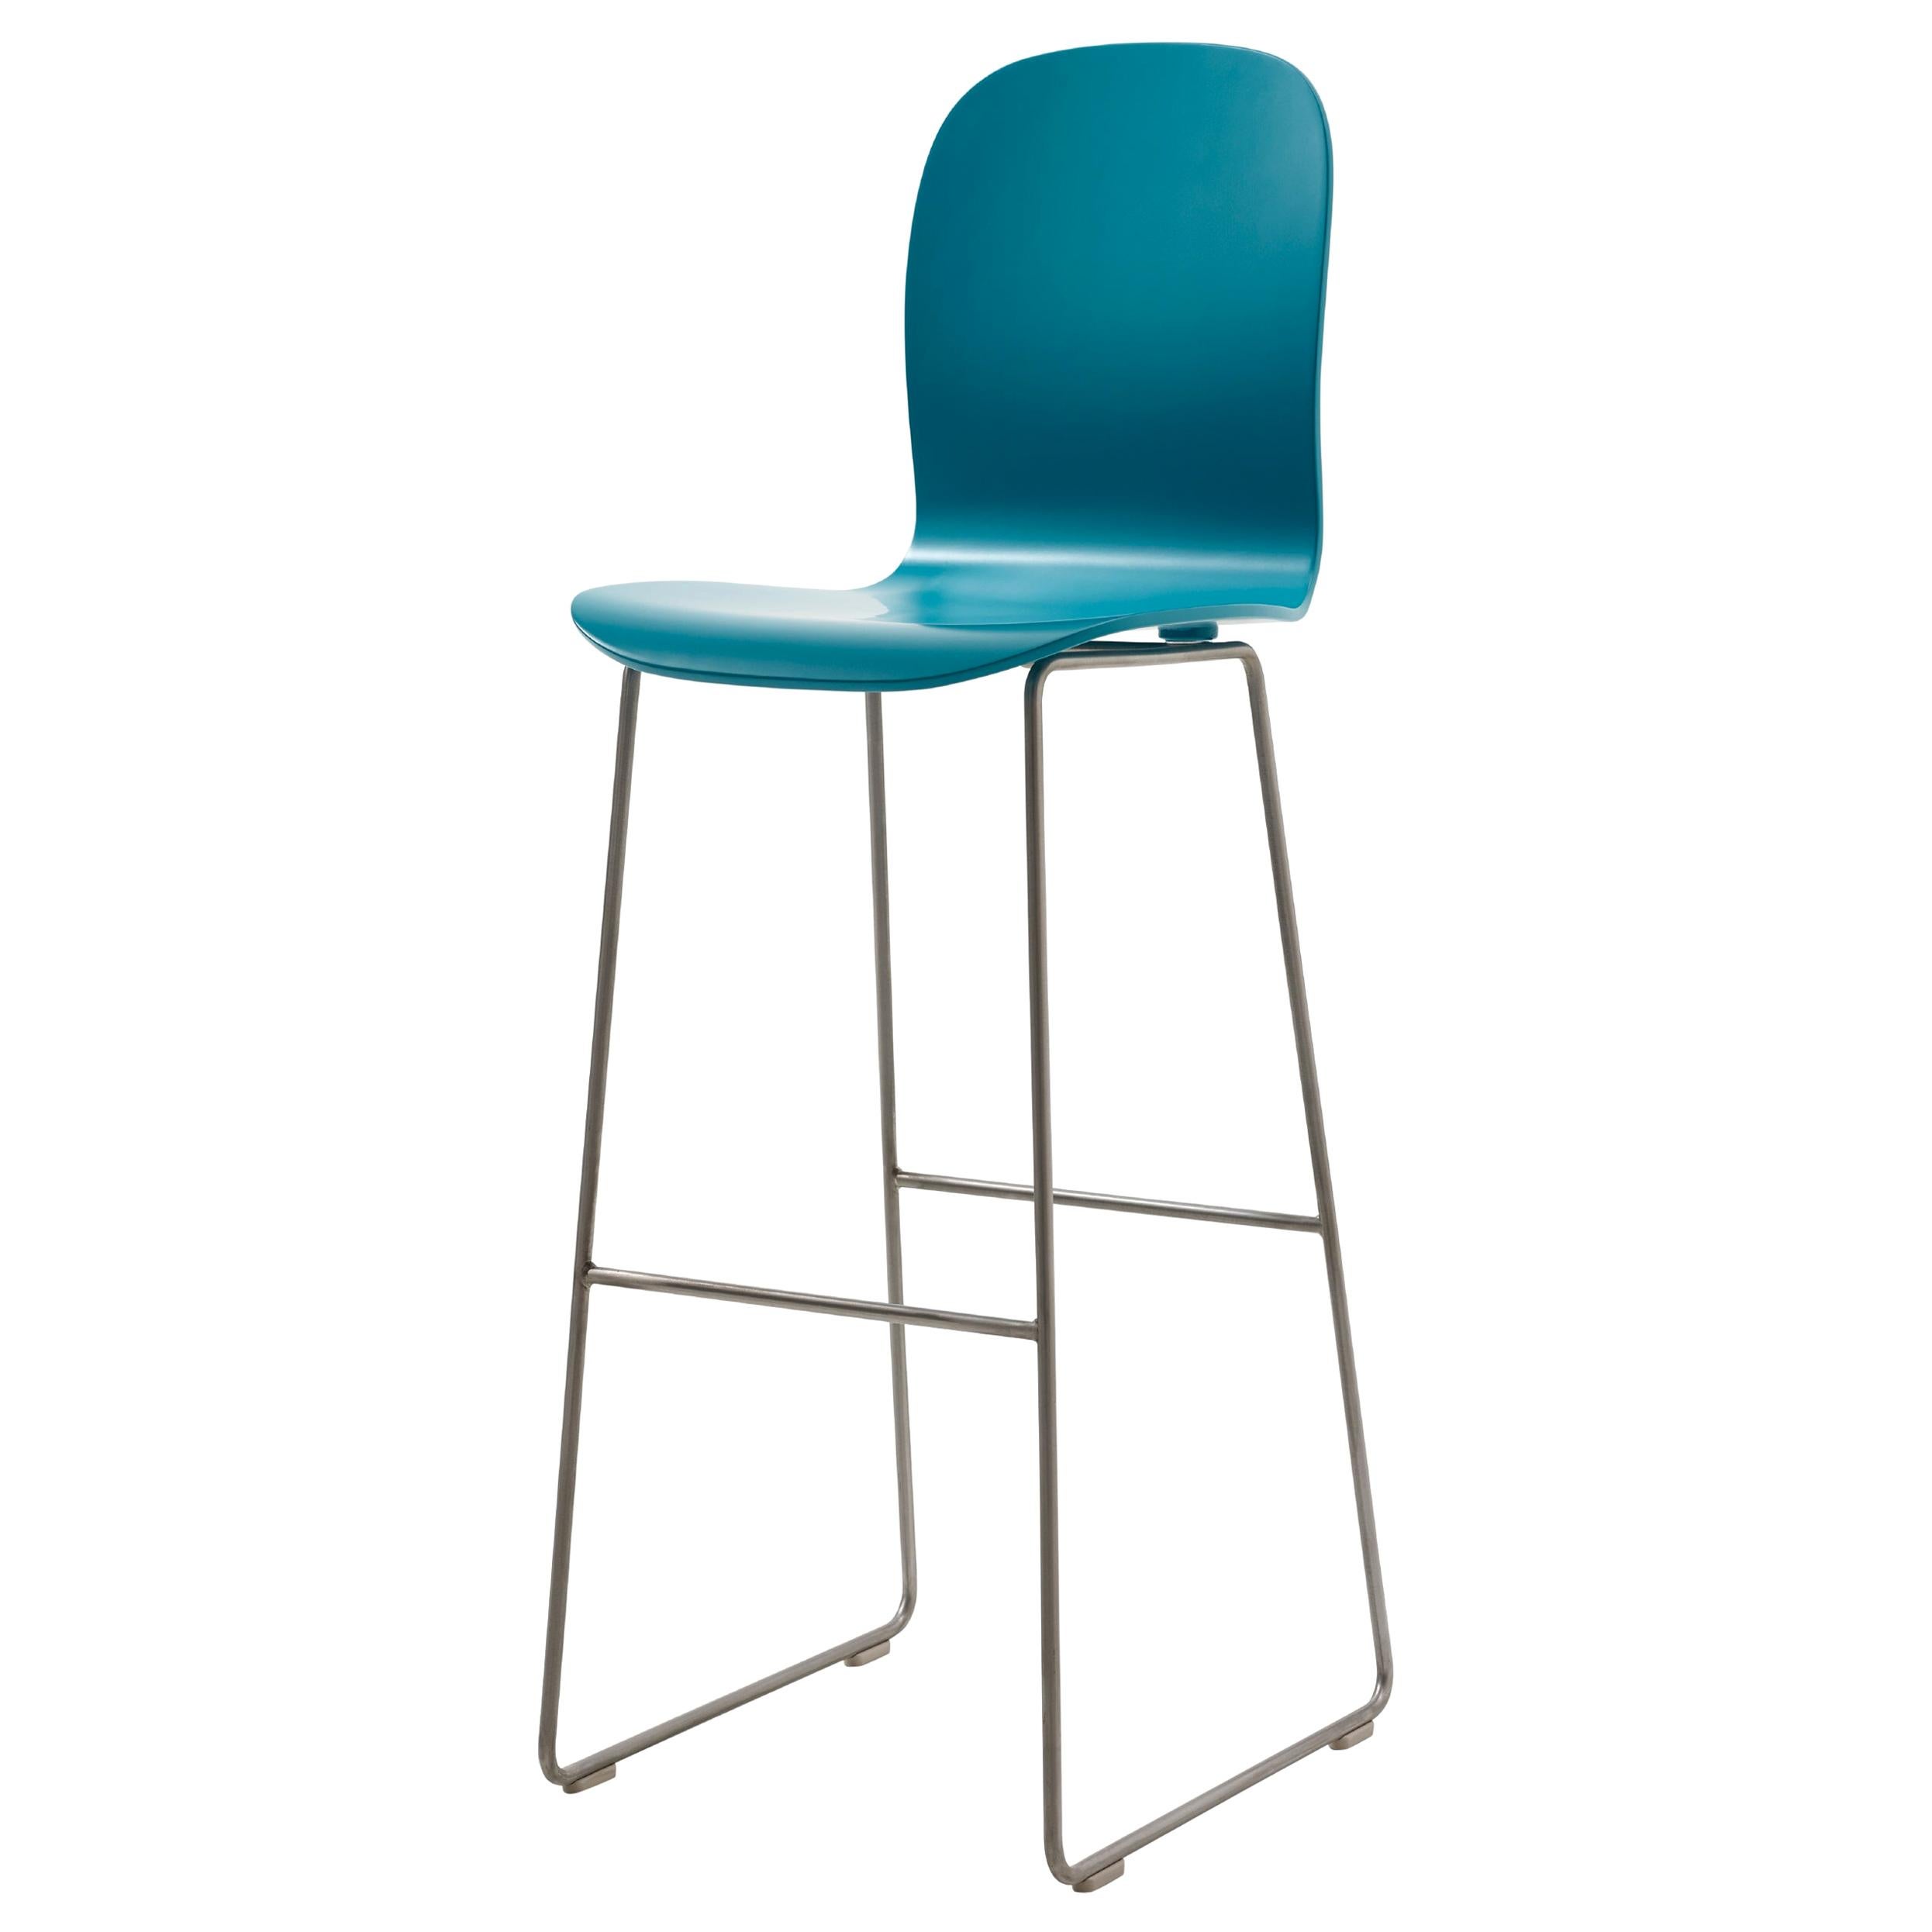 For Sale: Blue (77_PETROL BLUE) Jasper Morrison Tate Stool in Beech Plywood with Matte Lacquer for Cappellini